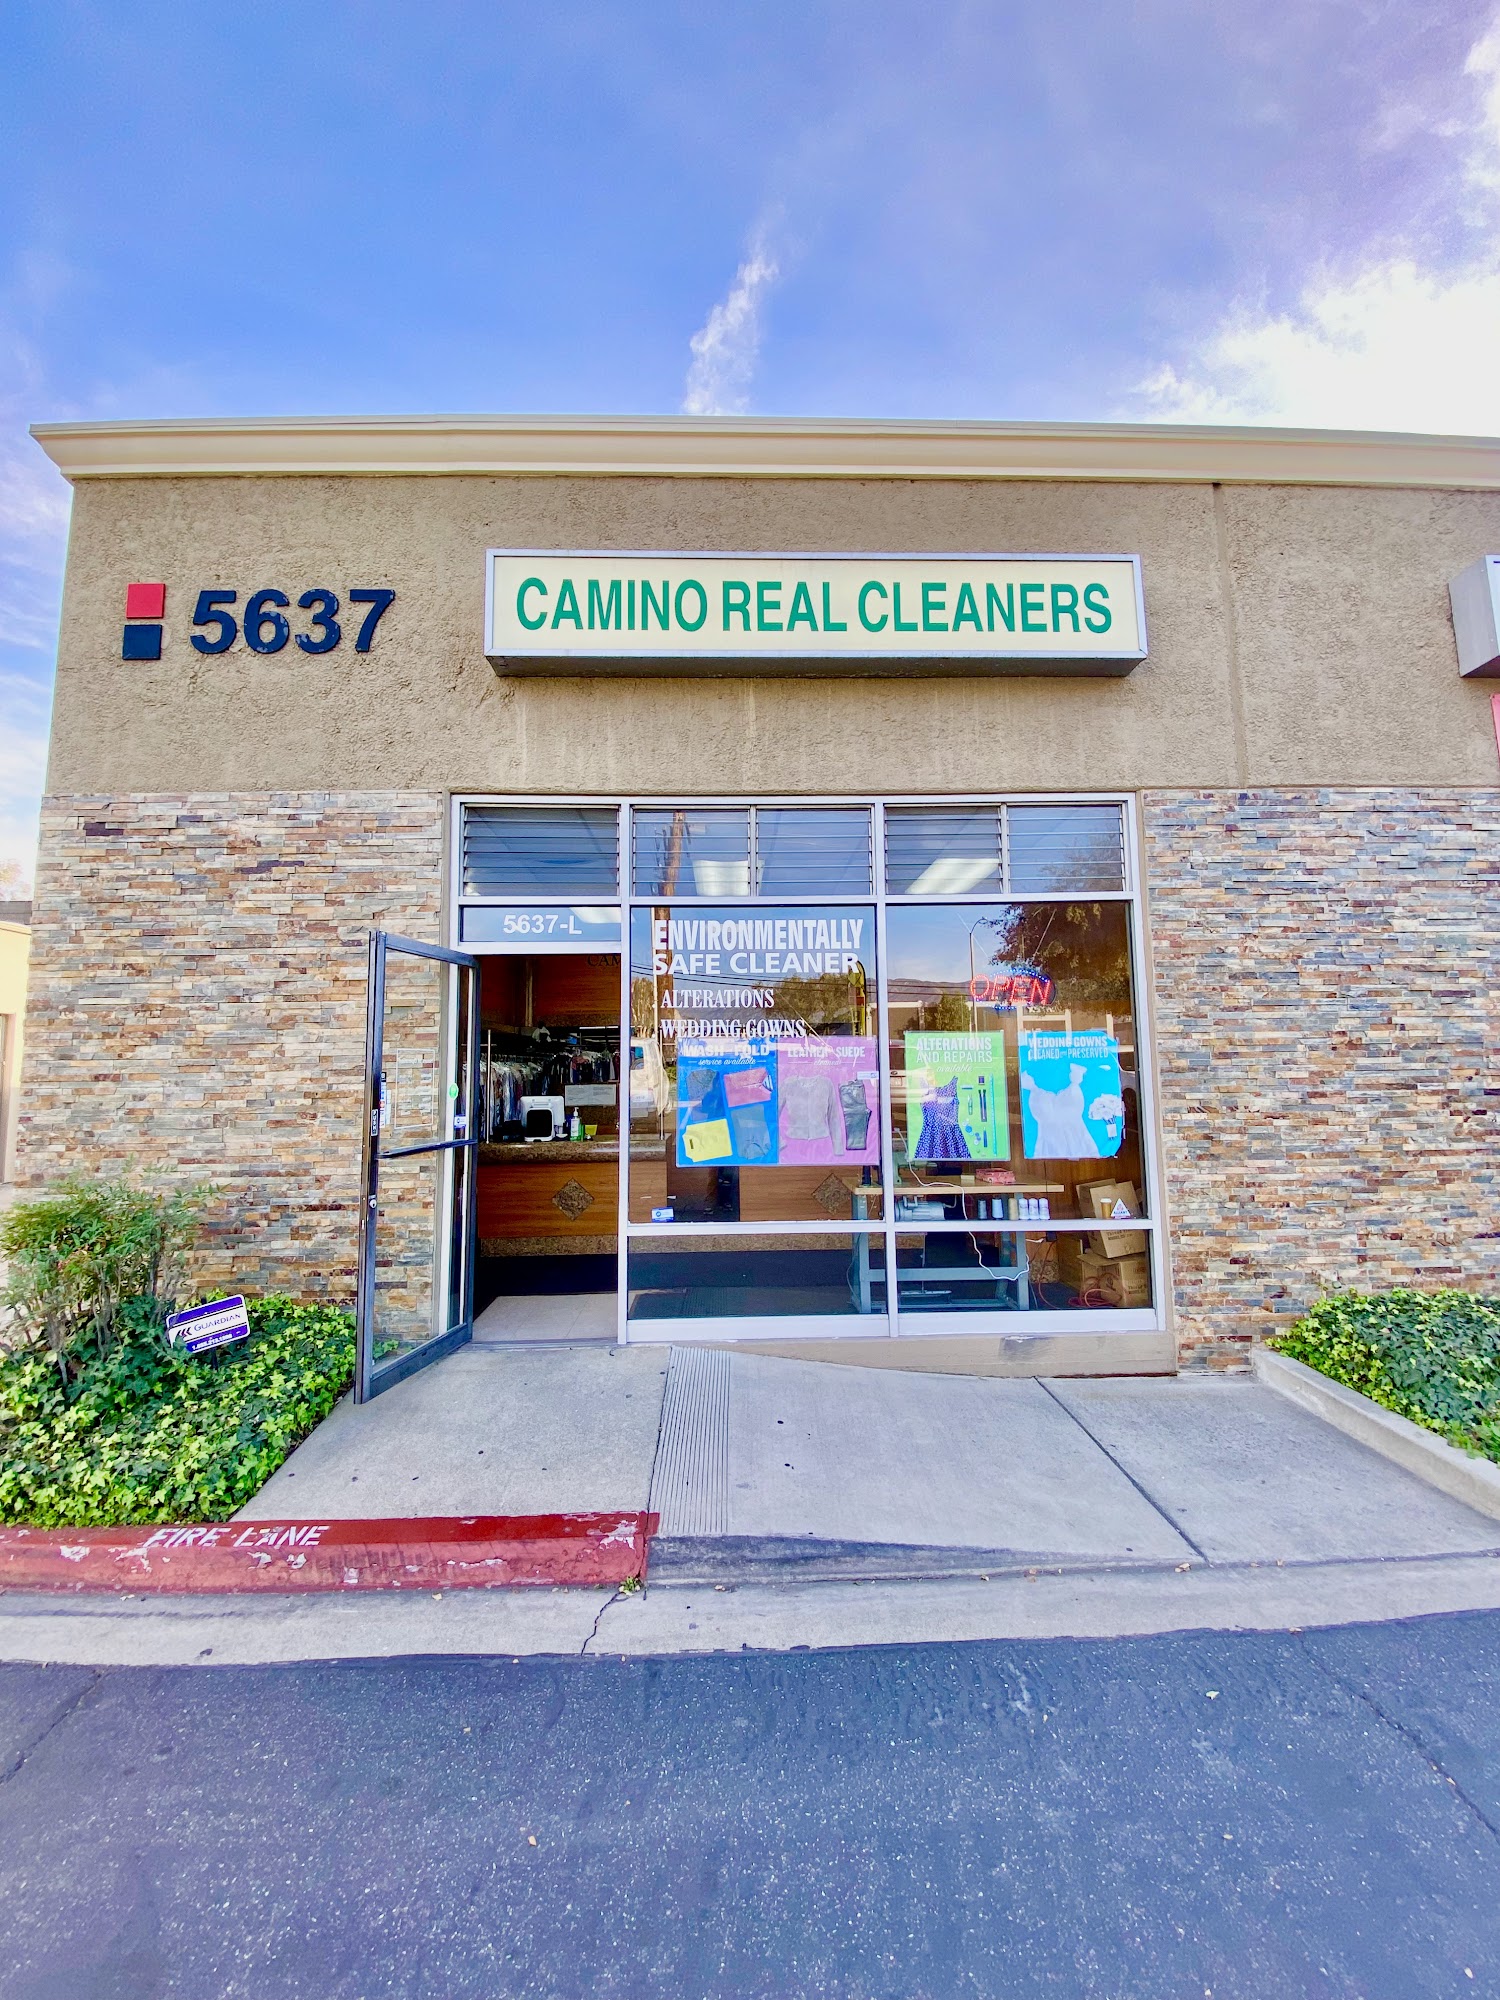 Camino Real Cleaners